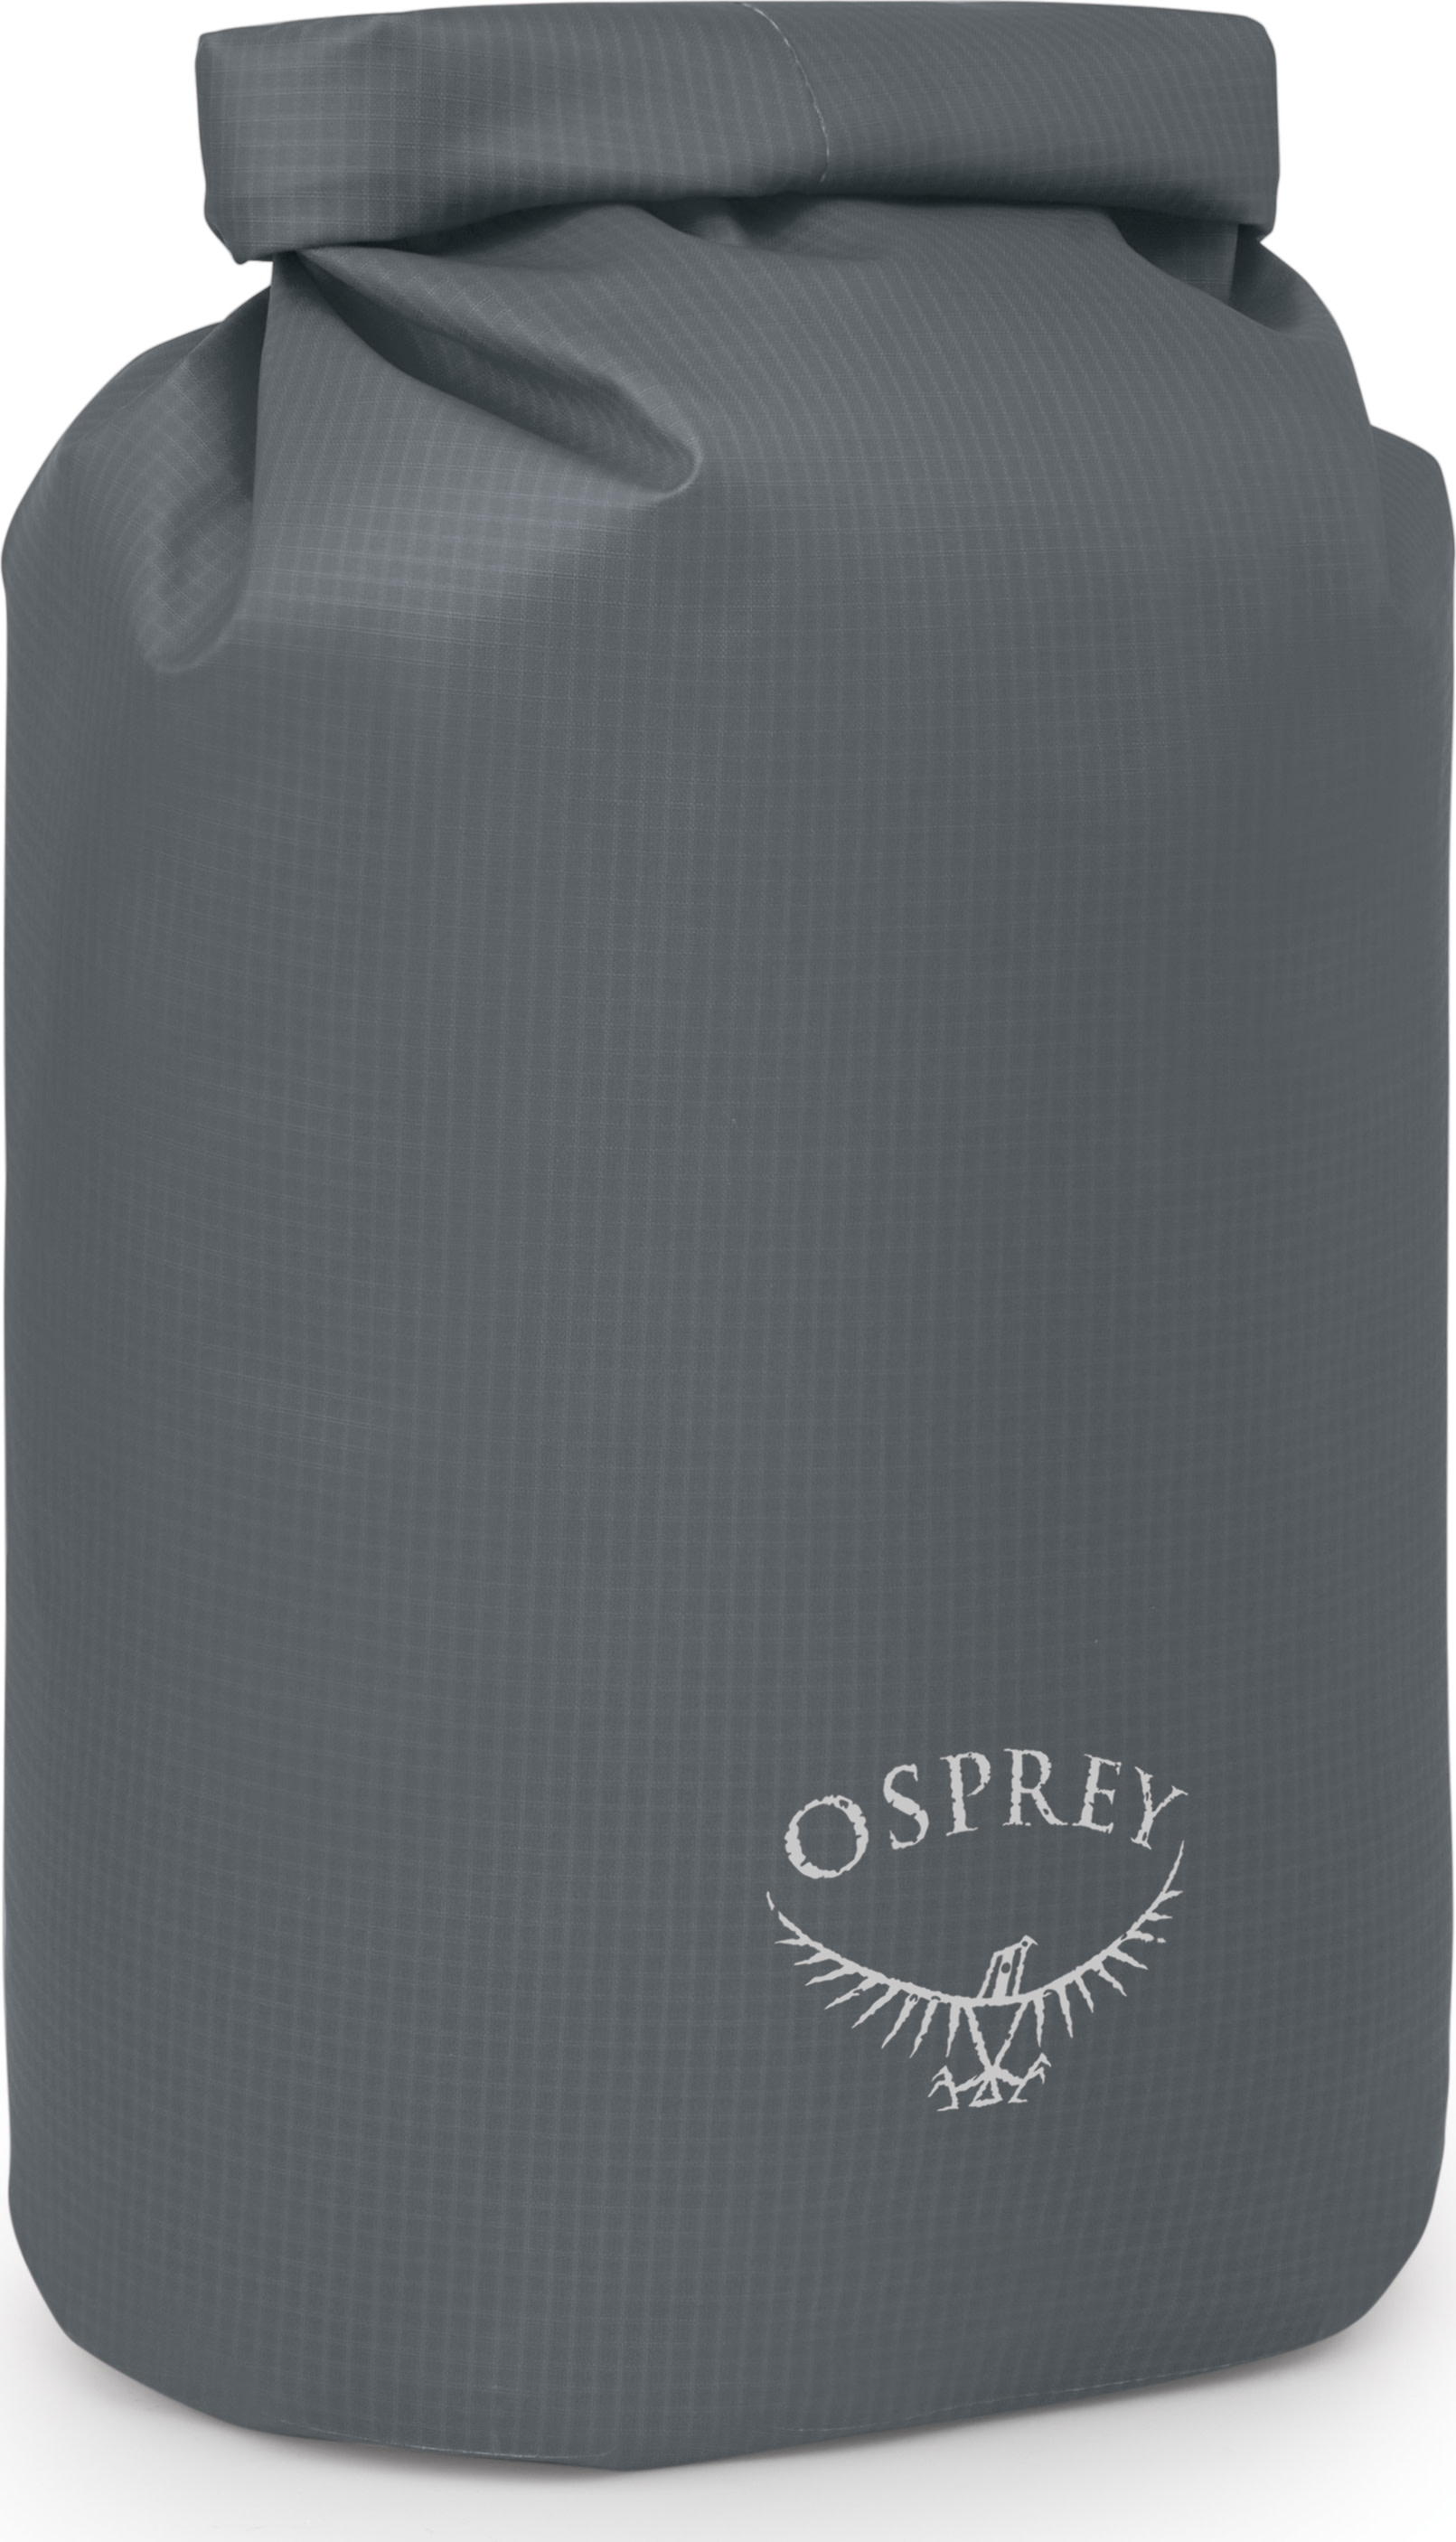 Osprey Wildwater Dry Bag 15 Tunnel Vision Grey